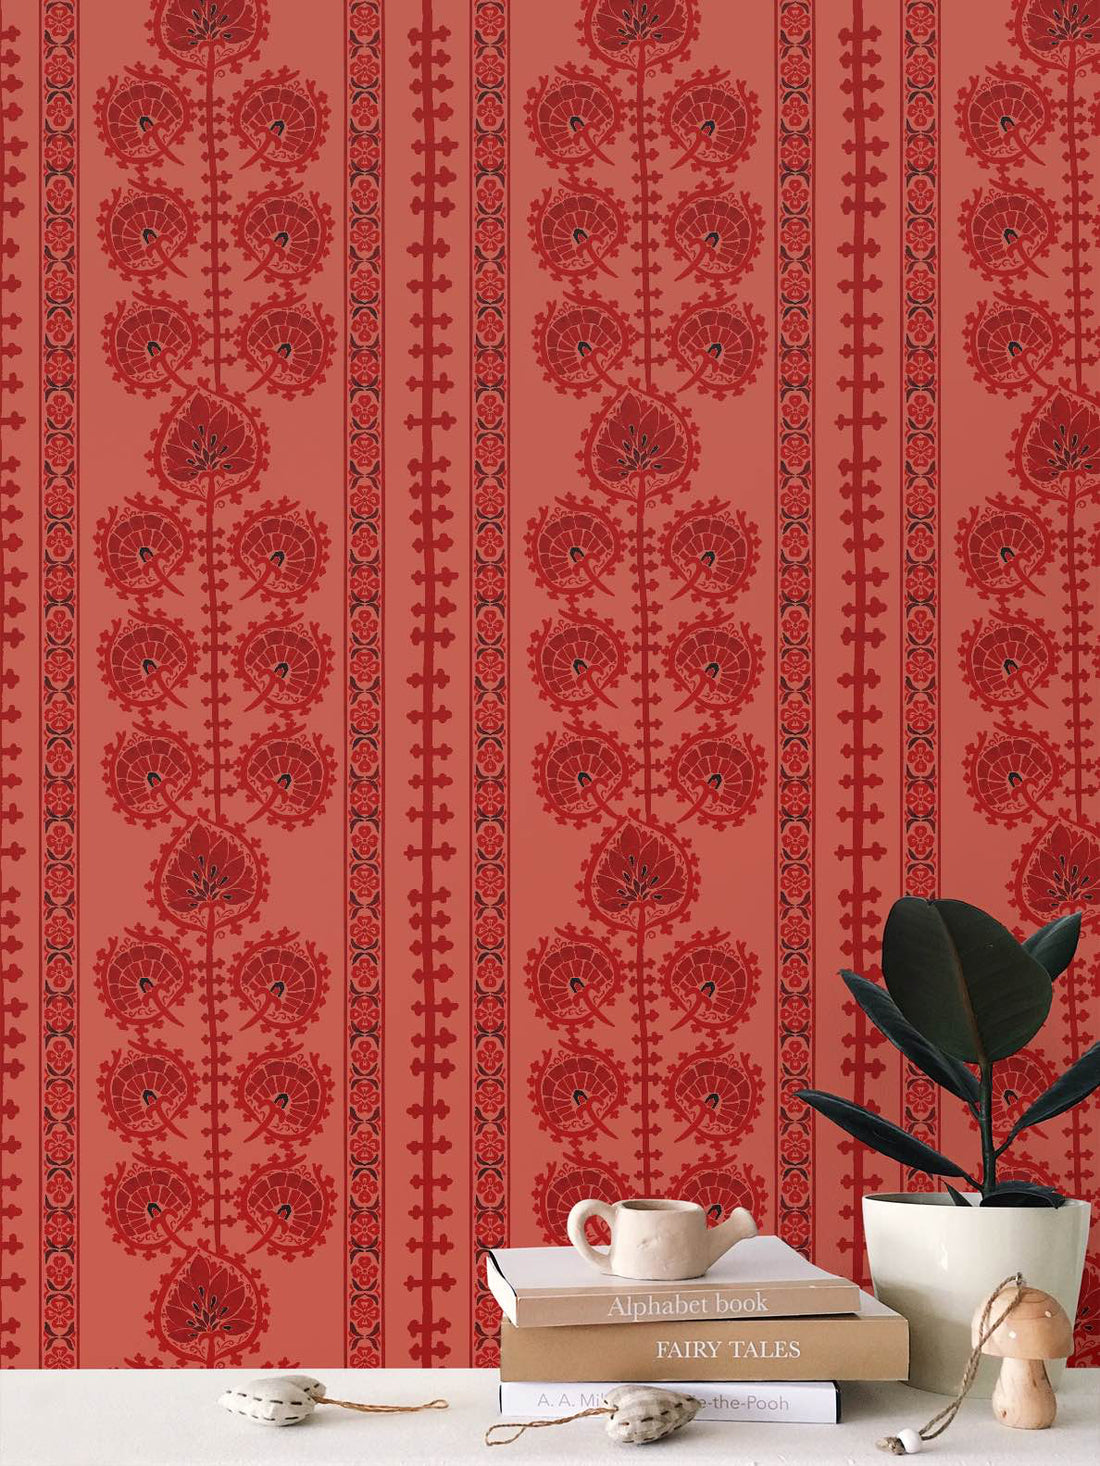 Moroccan Floral Wallpaper, Rust Reds